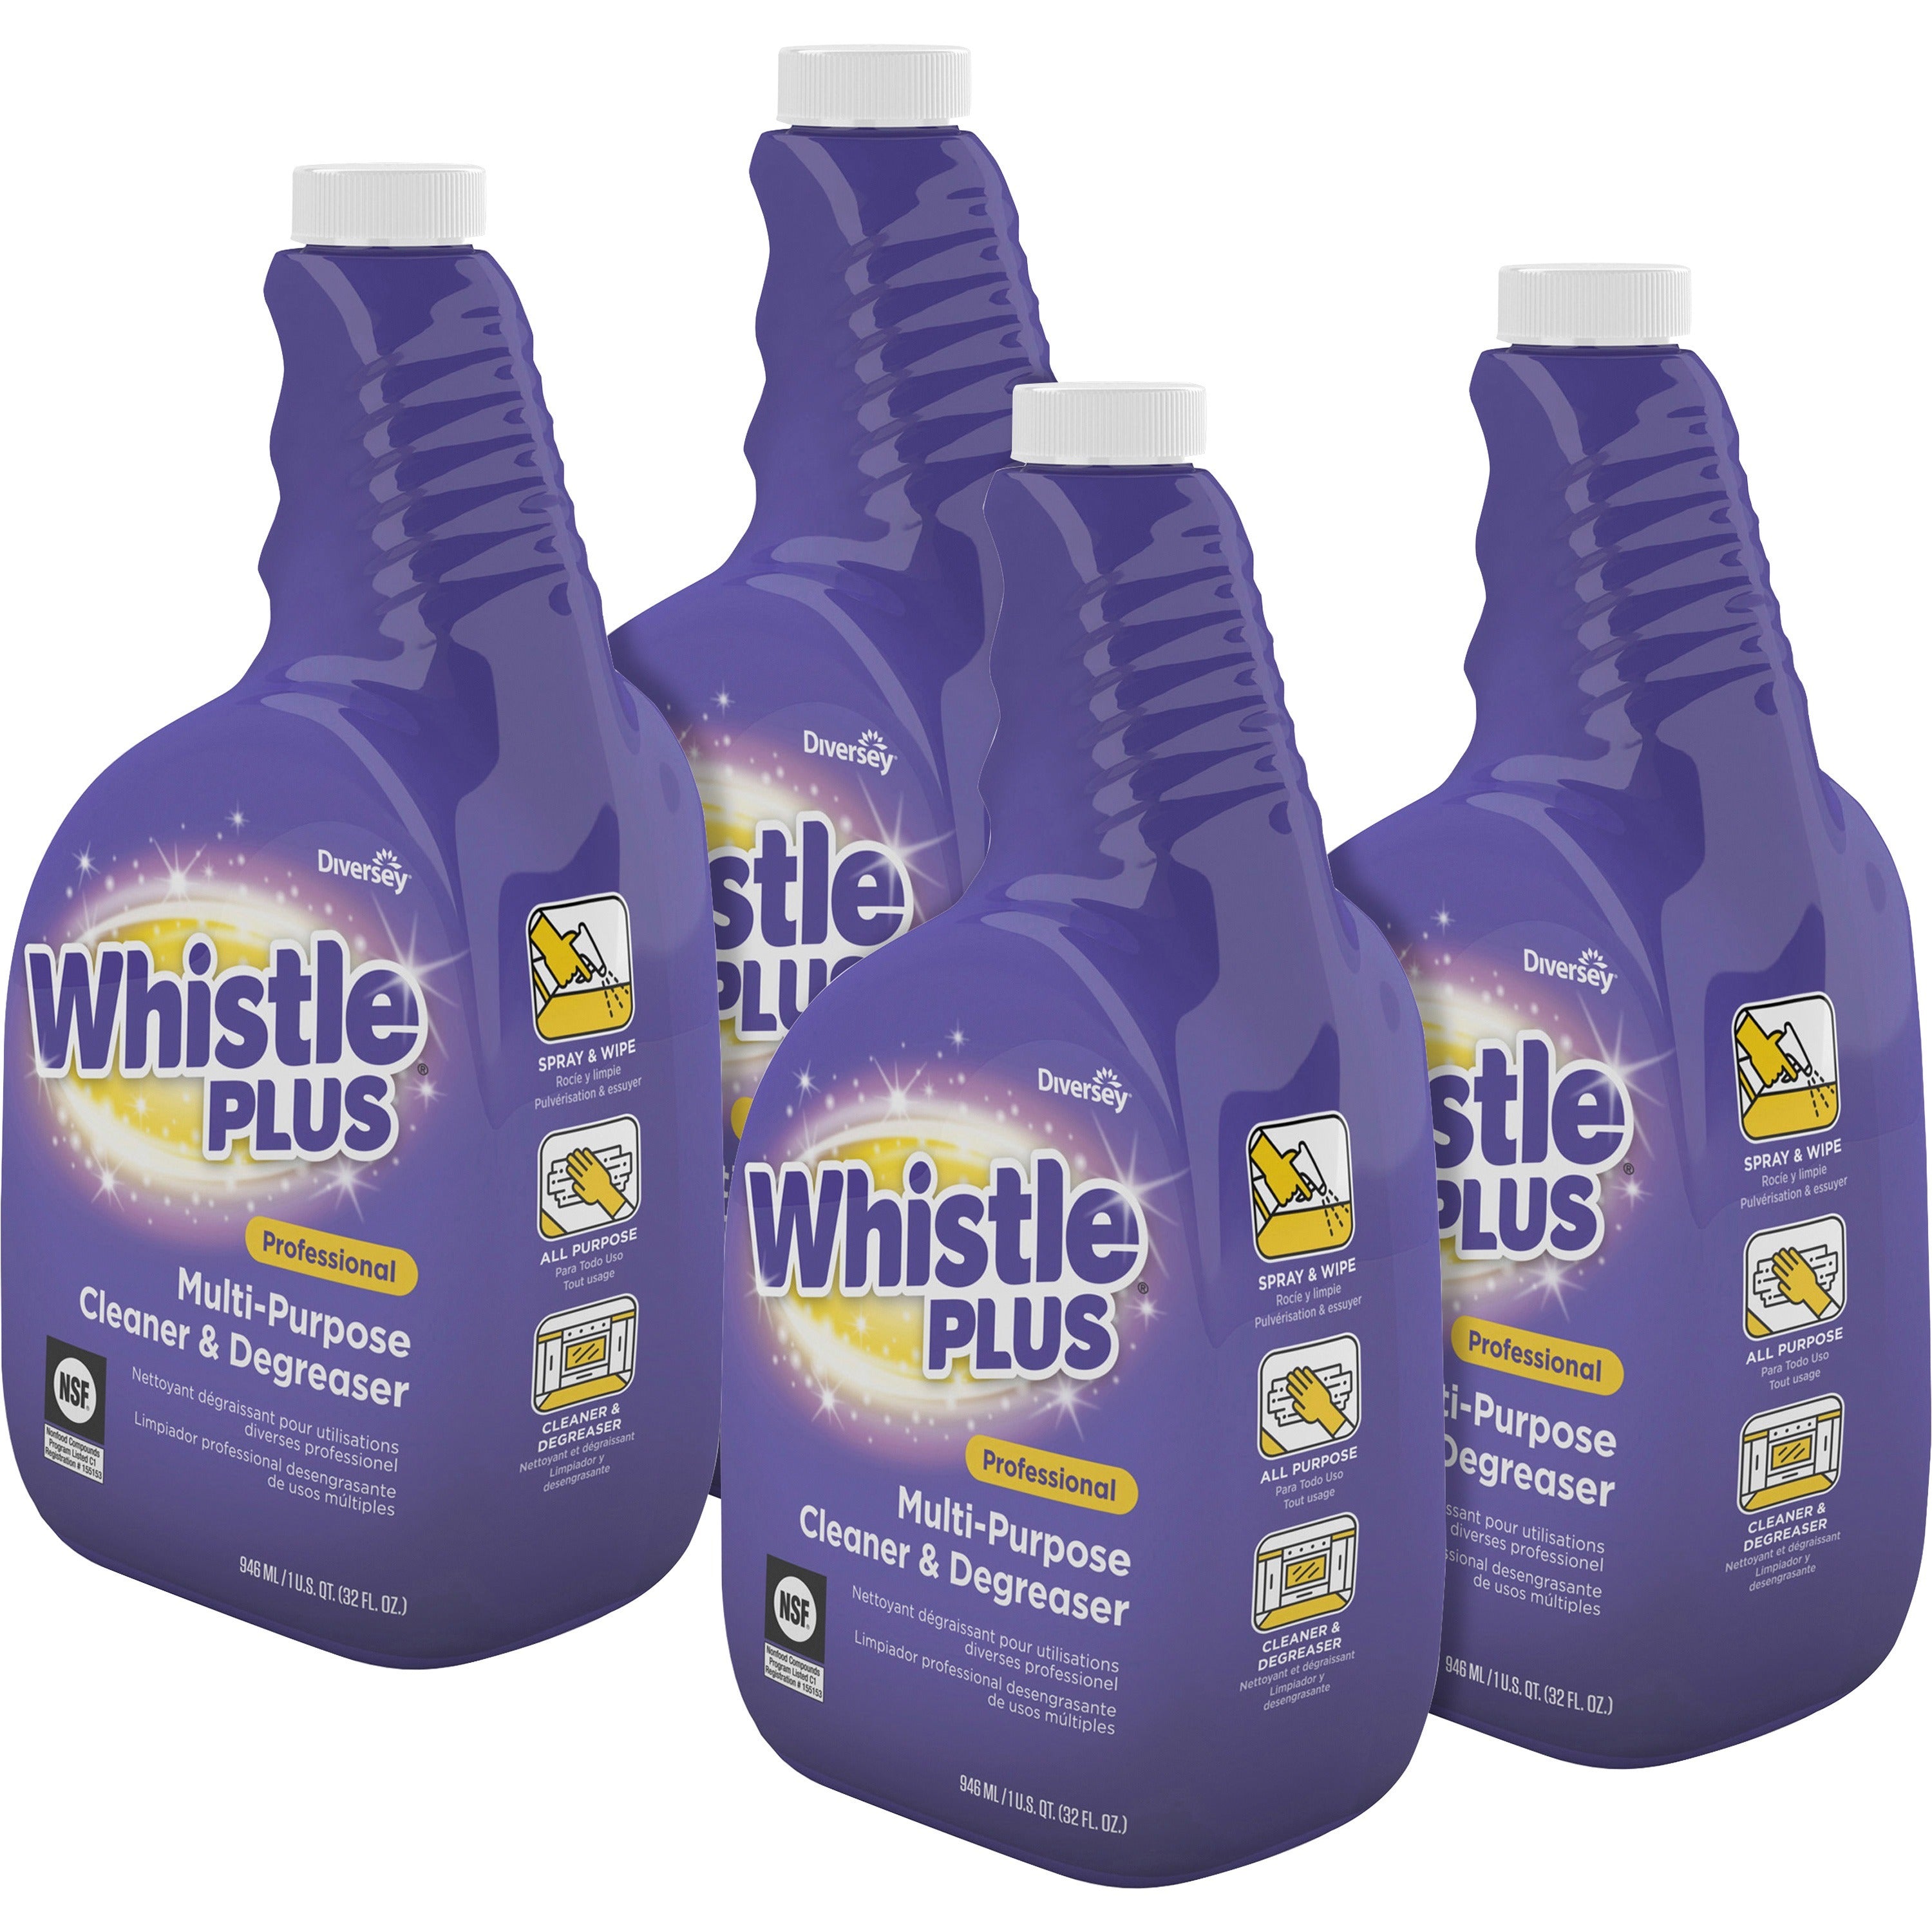 diversey-whistle-plus-cleaner-&-degreaser-ready-to-use-32-fl-oz-1-quart-citrus-scent-4-carton-heavy-duty-easy-to-use-rinse-free-non-streaking-phosphate-free-purple_dvocbd540571ct - 1